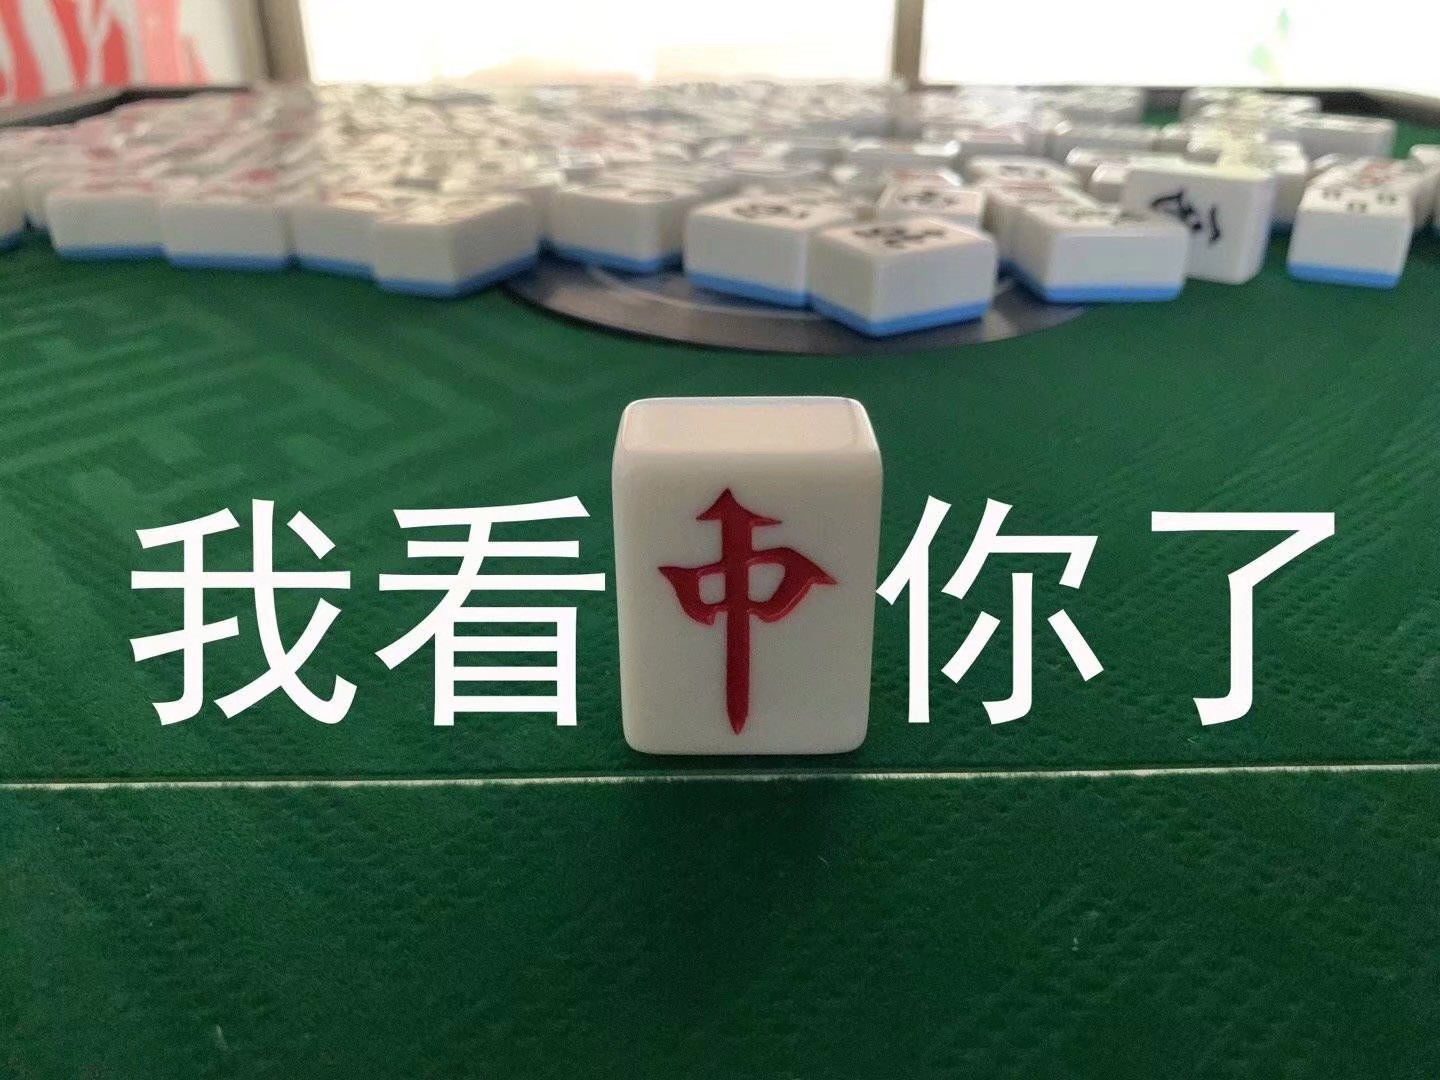 Mahjong Tiles, Mahjong, A Loaf PNG Transparent Image and Clipart for ...